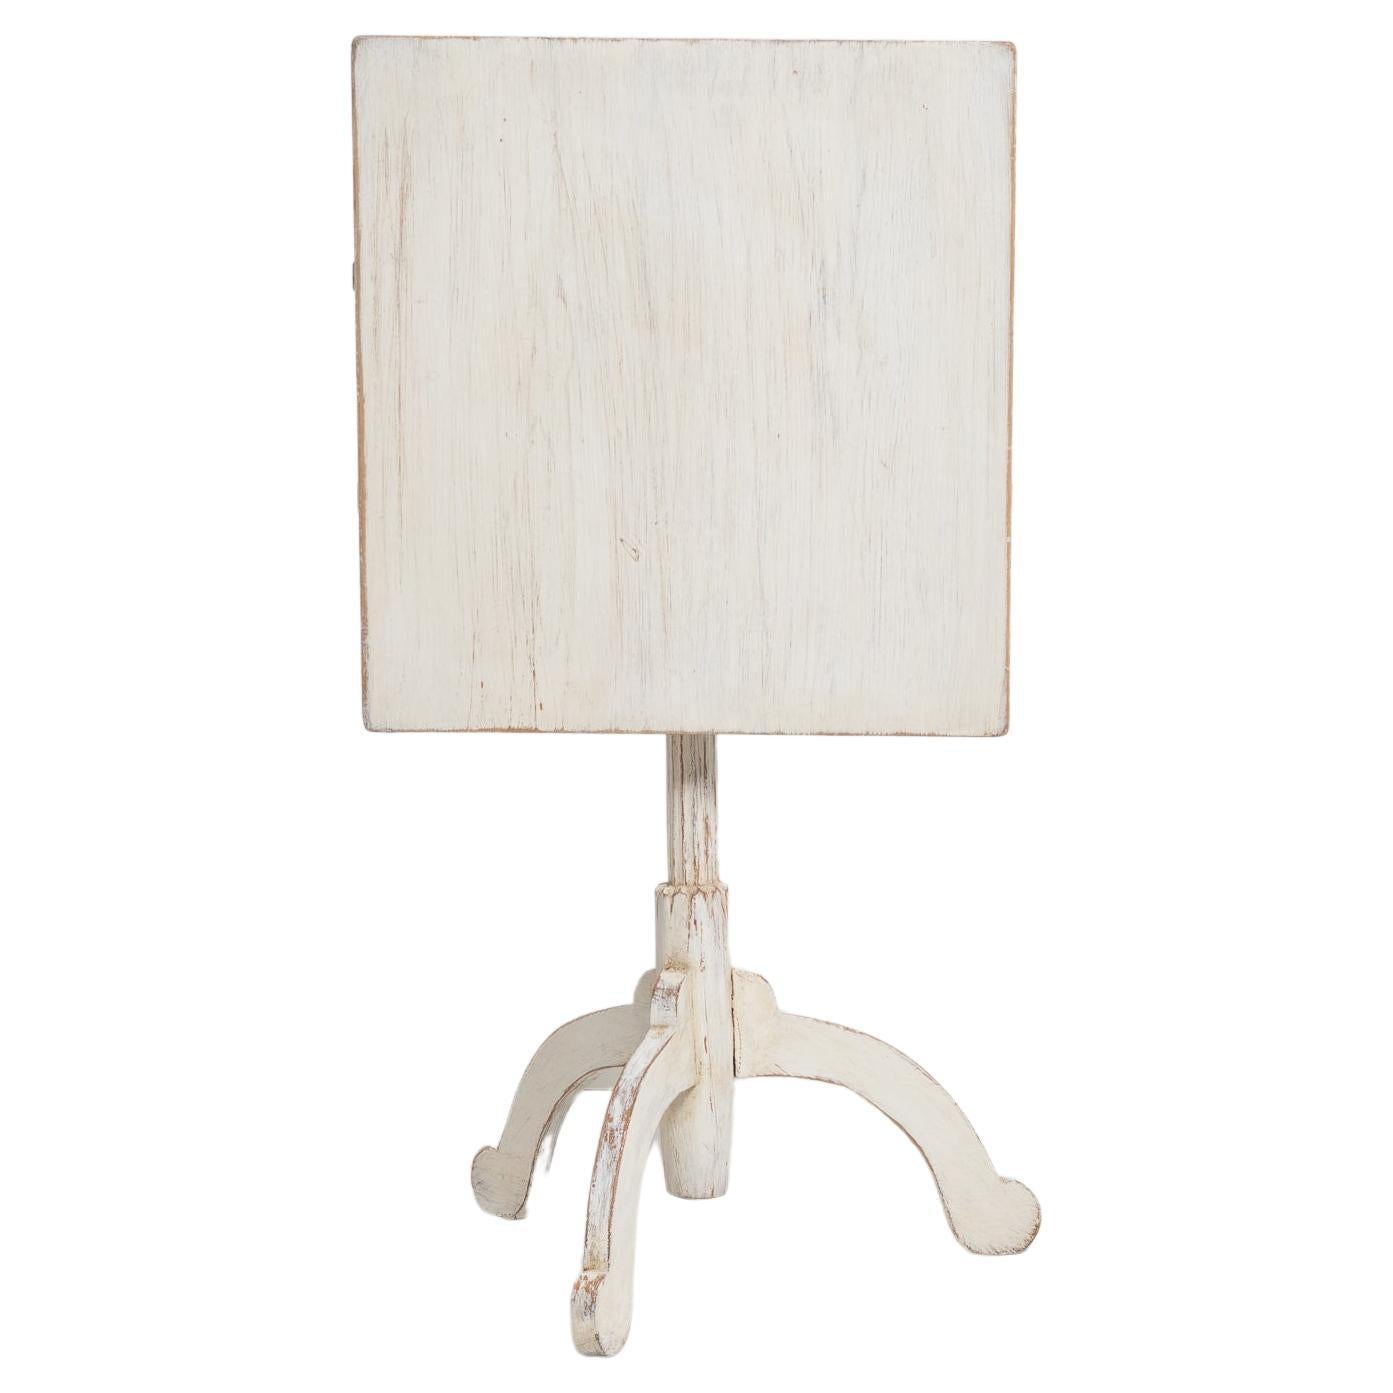 Small Swedish Antique White Rustic Country Tilt Top Column Table